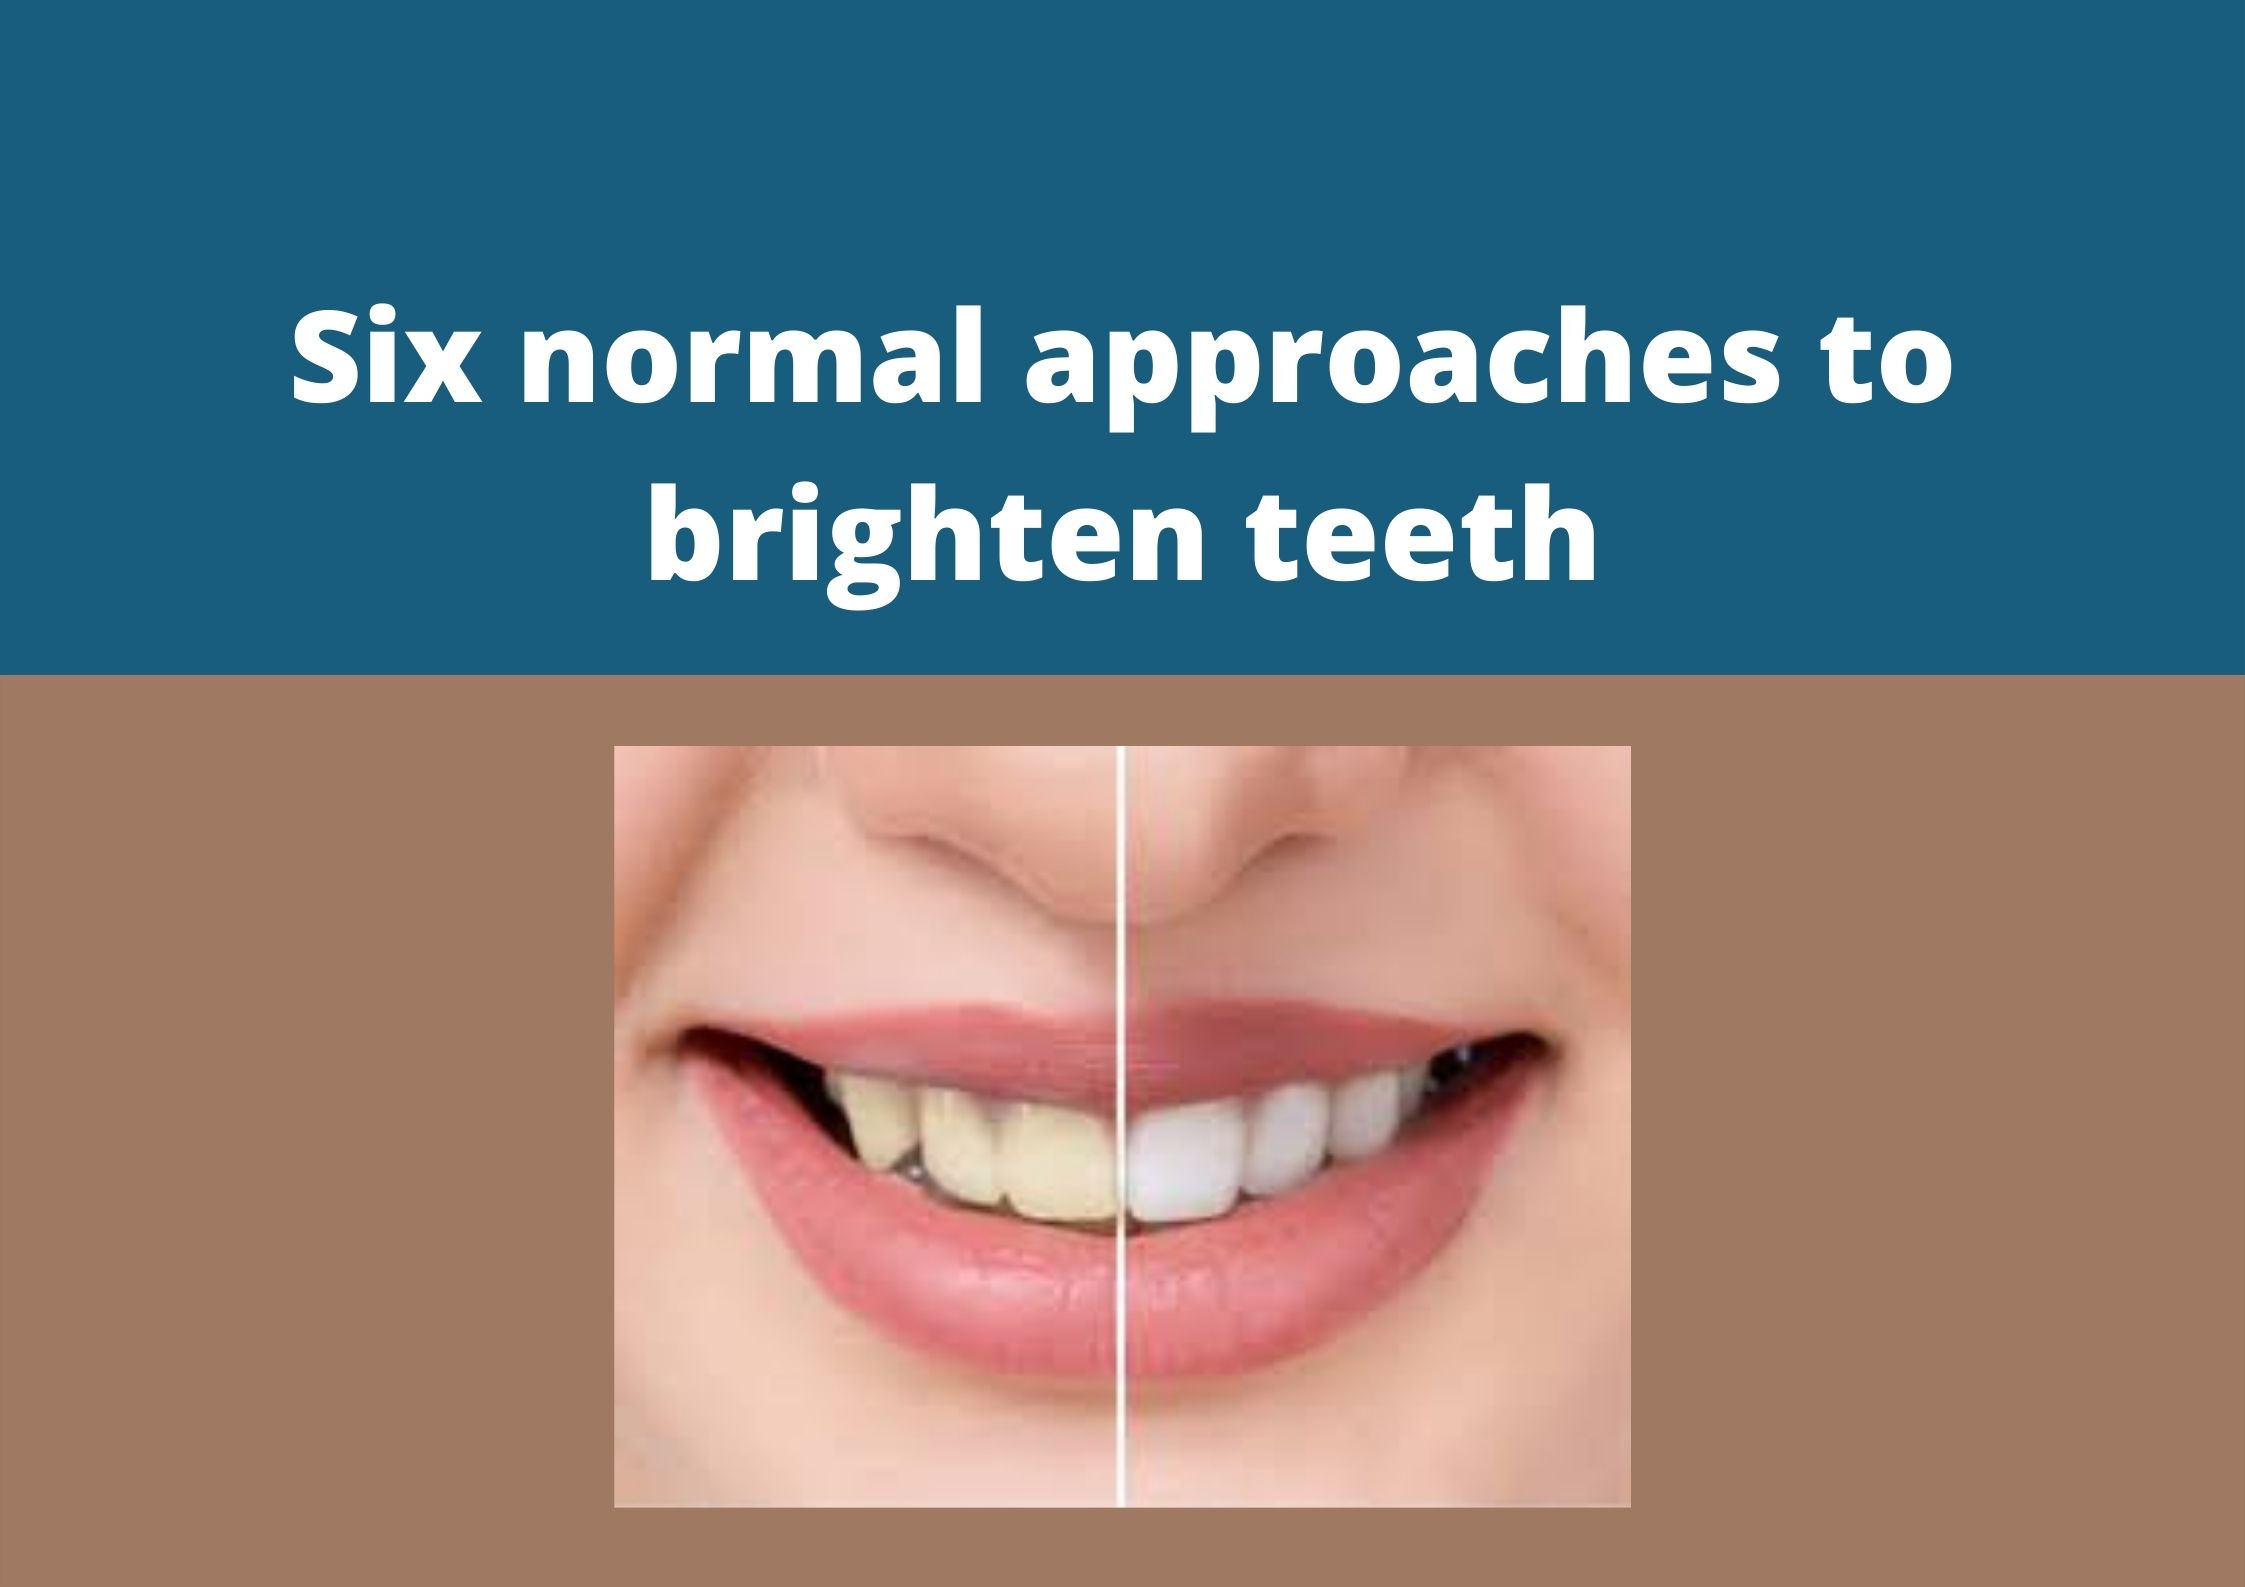 Six normal approaches to brighten teeth